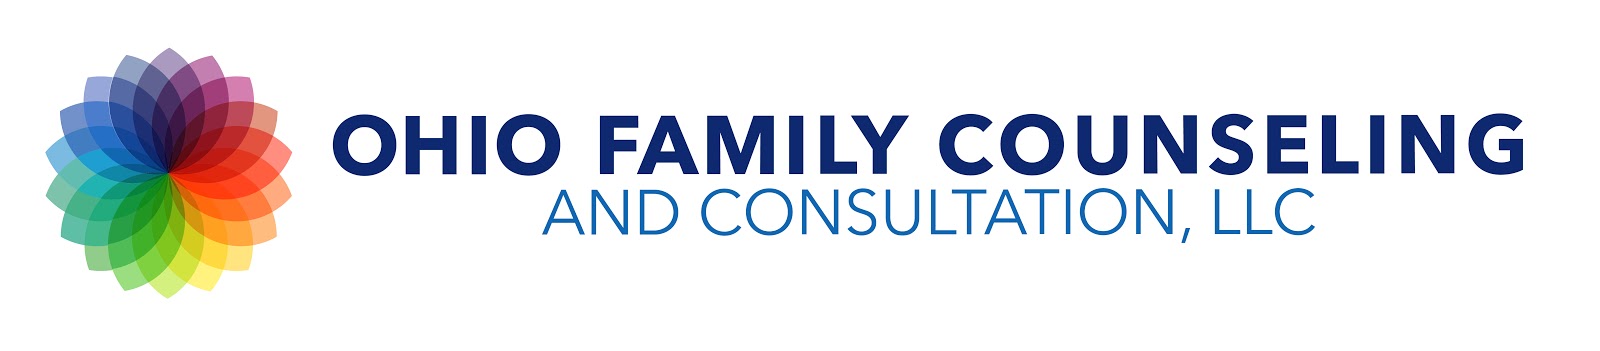 Ohio Family Counseling and Consultation 